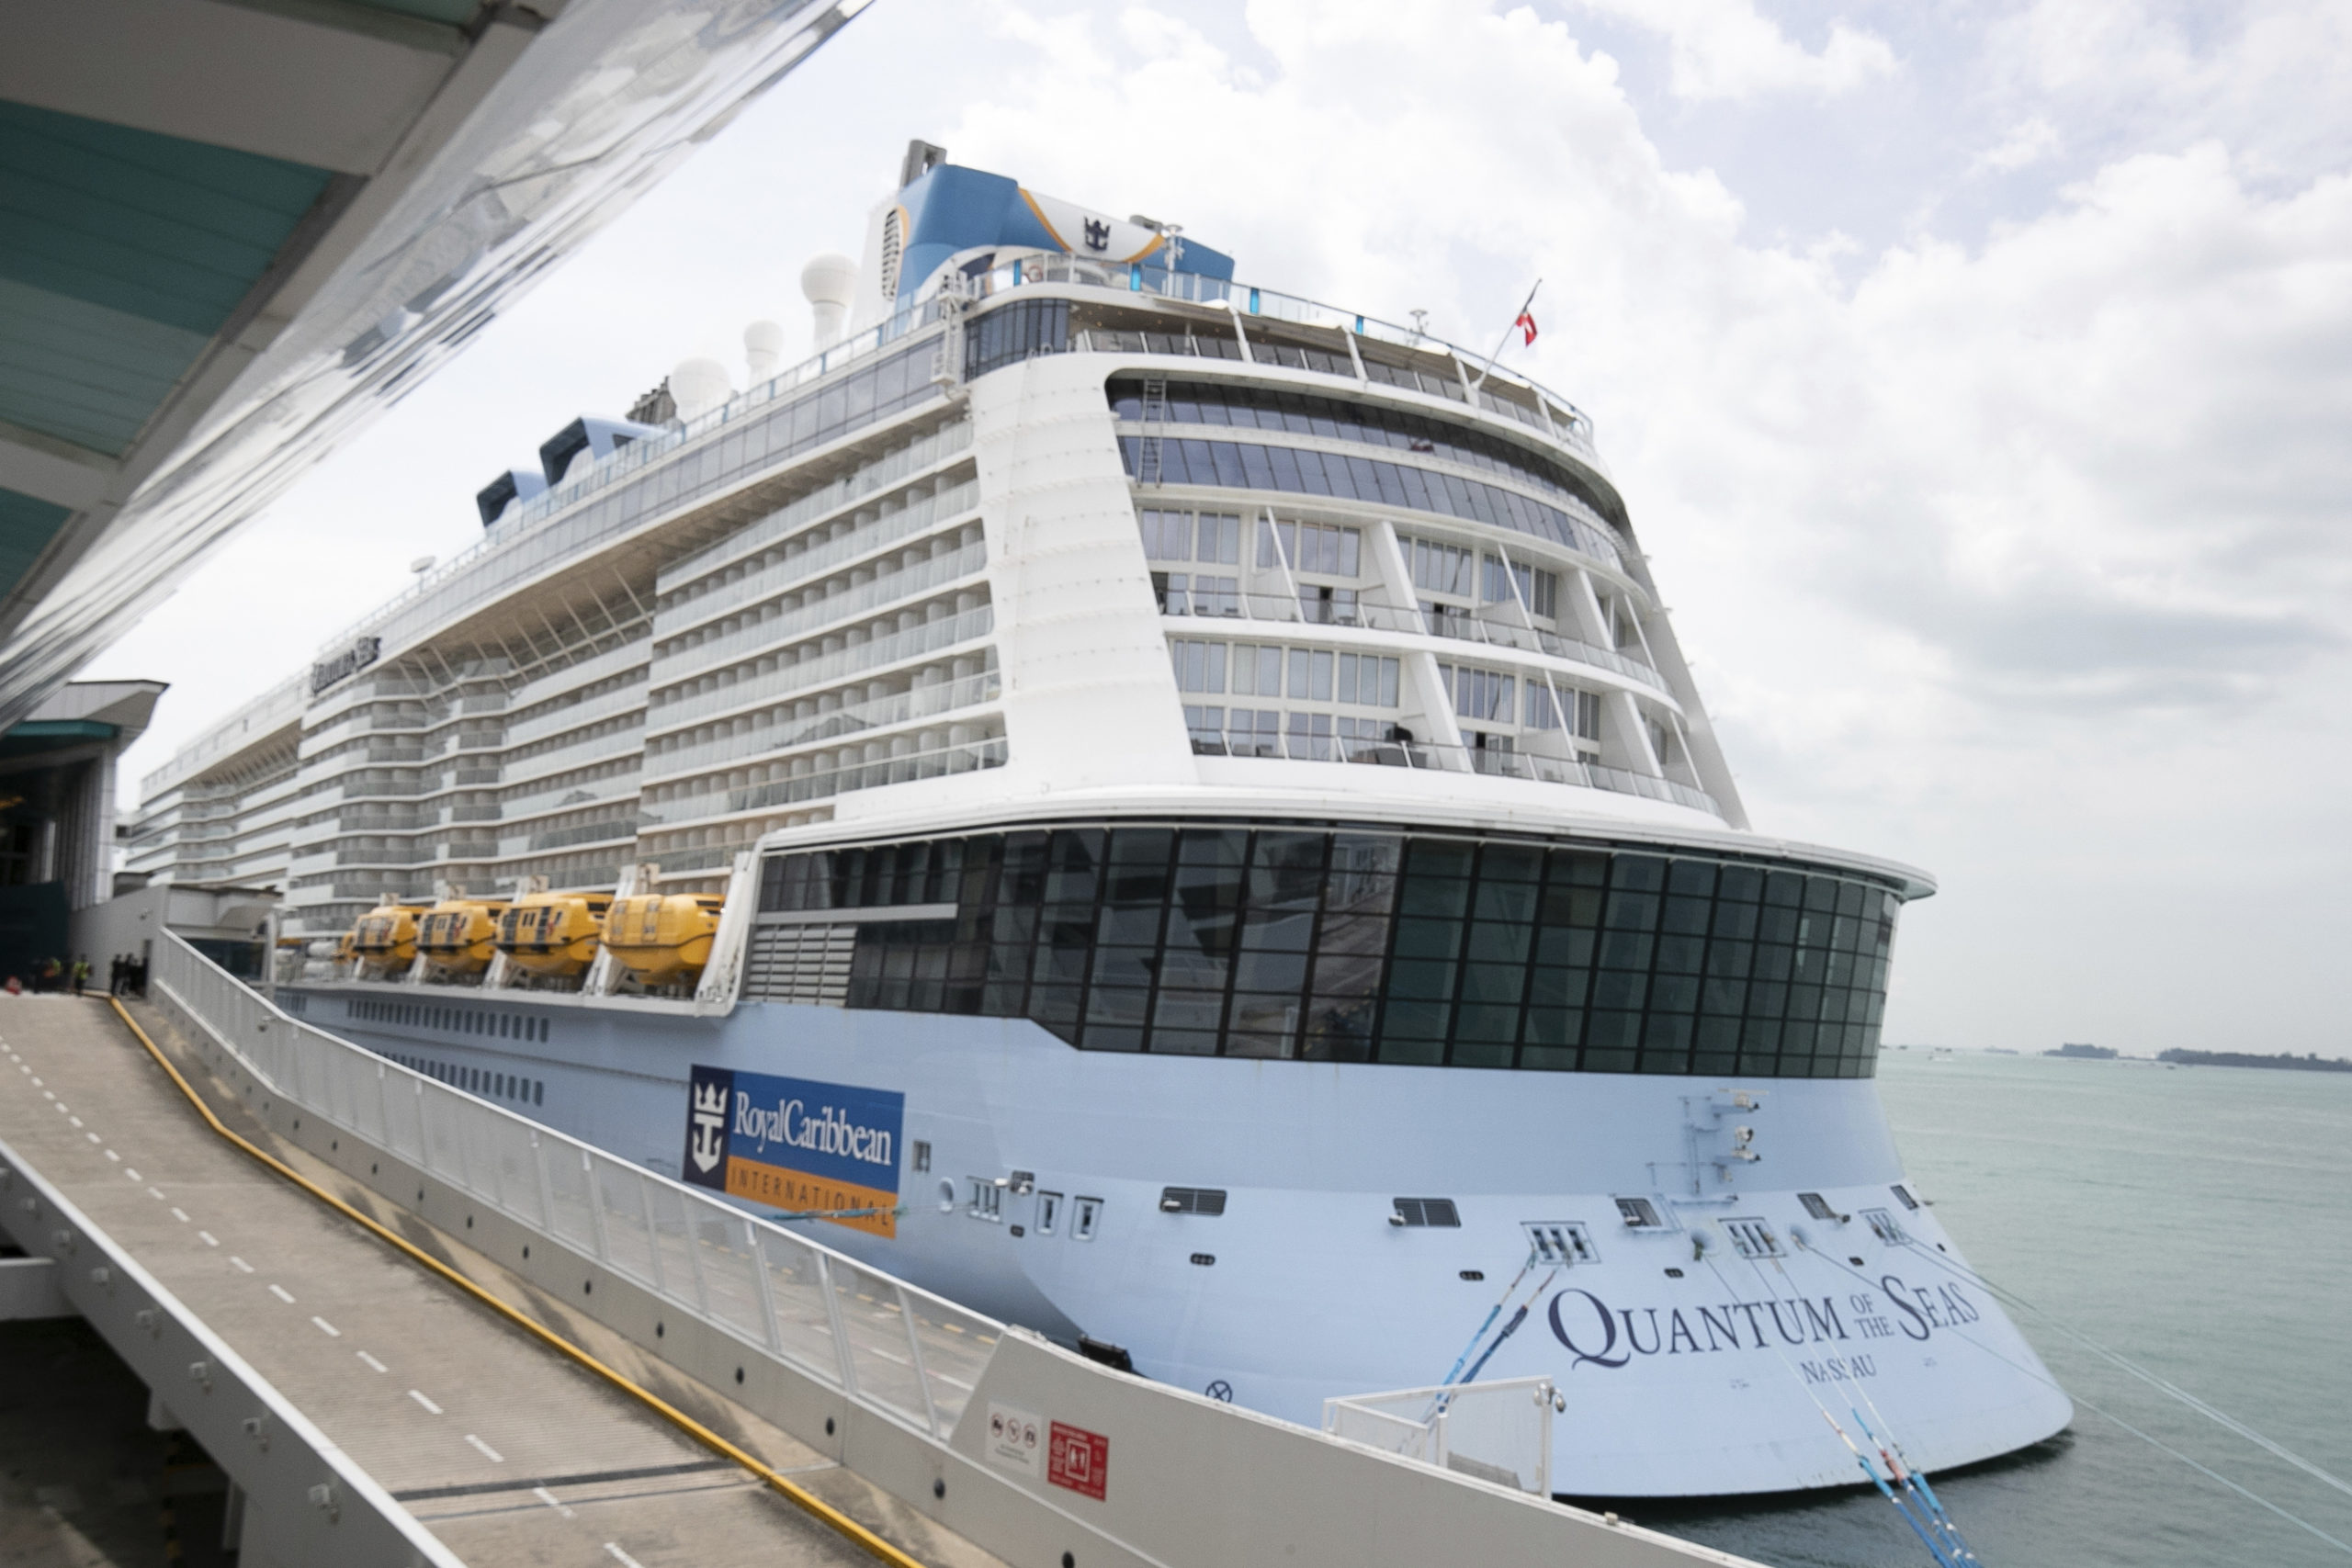 Royal Caribbean Cruise Cut Short When Passenger Tests Positive for COVID-19